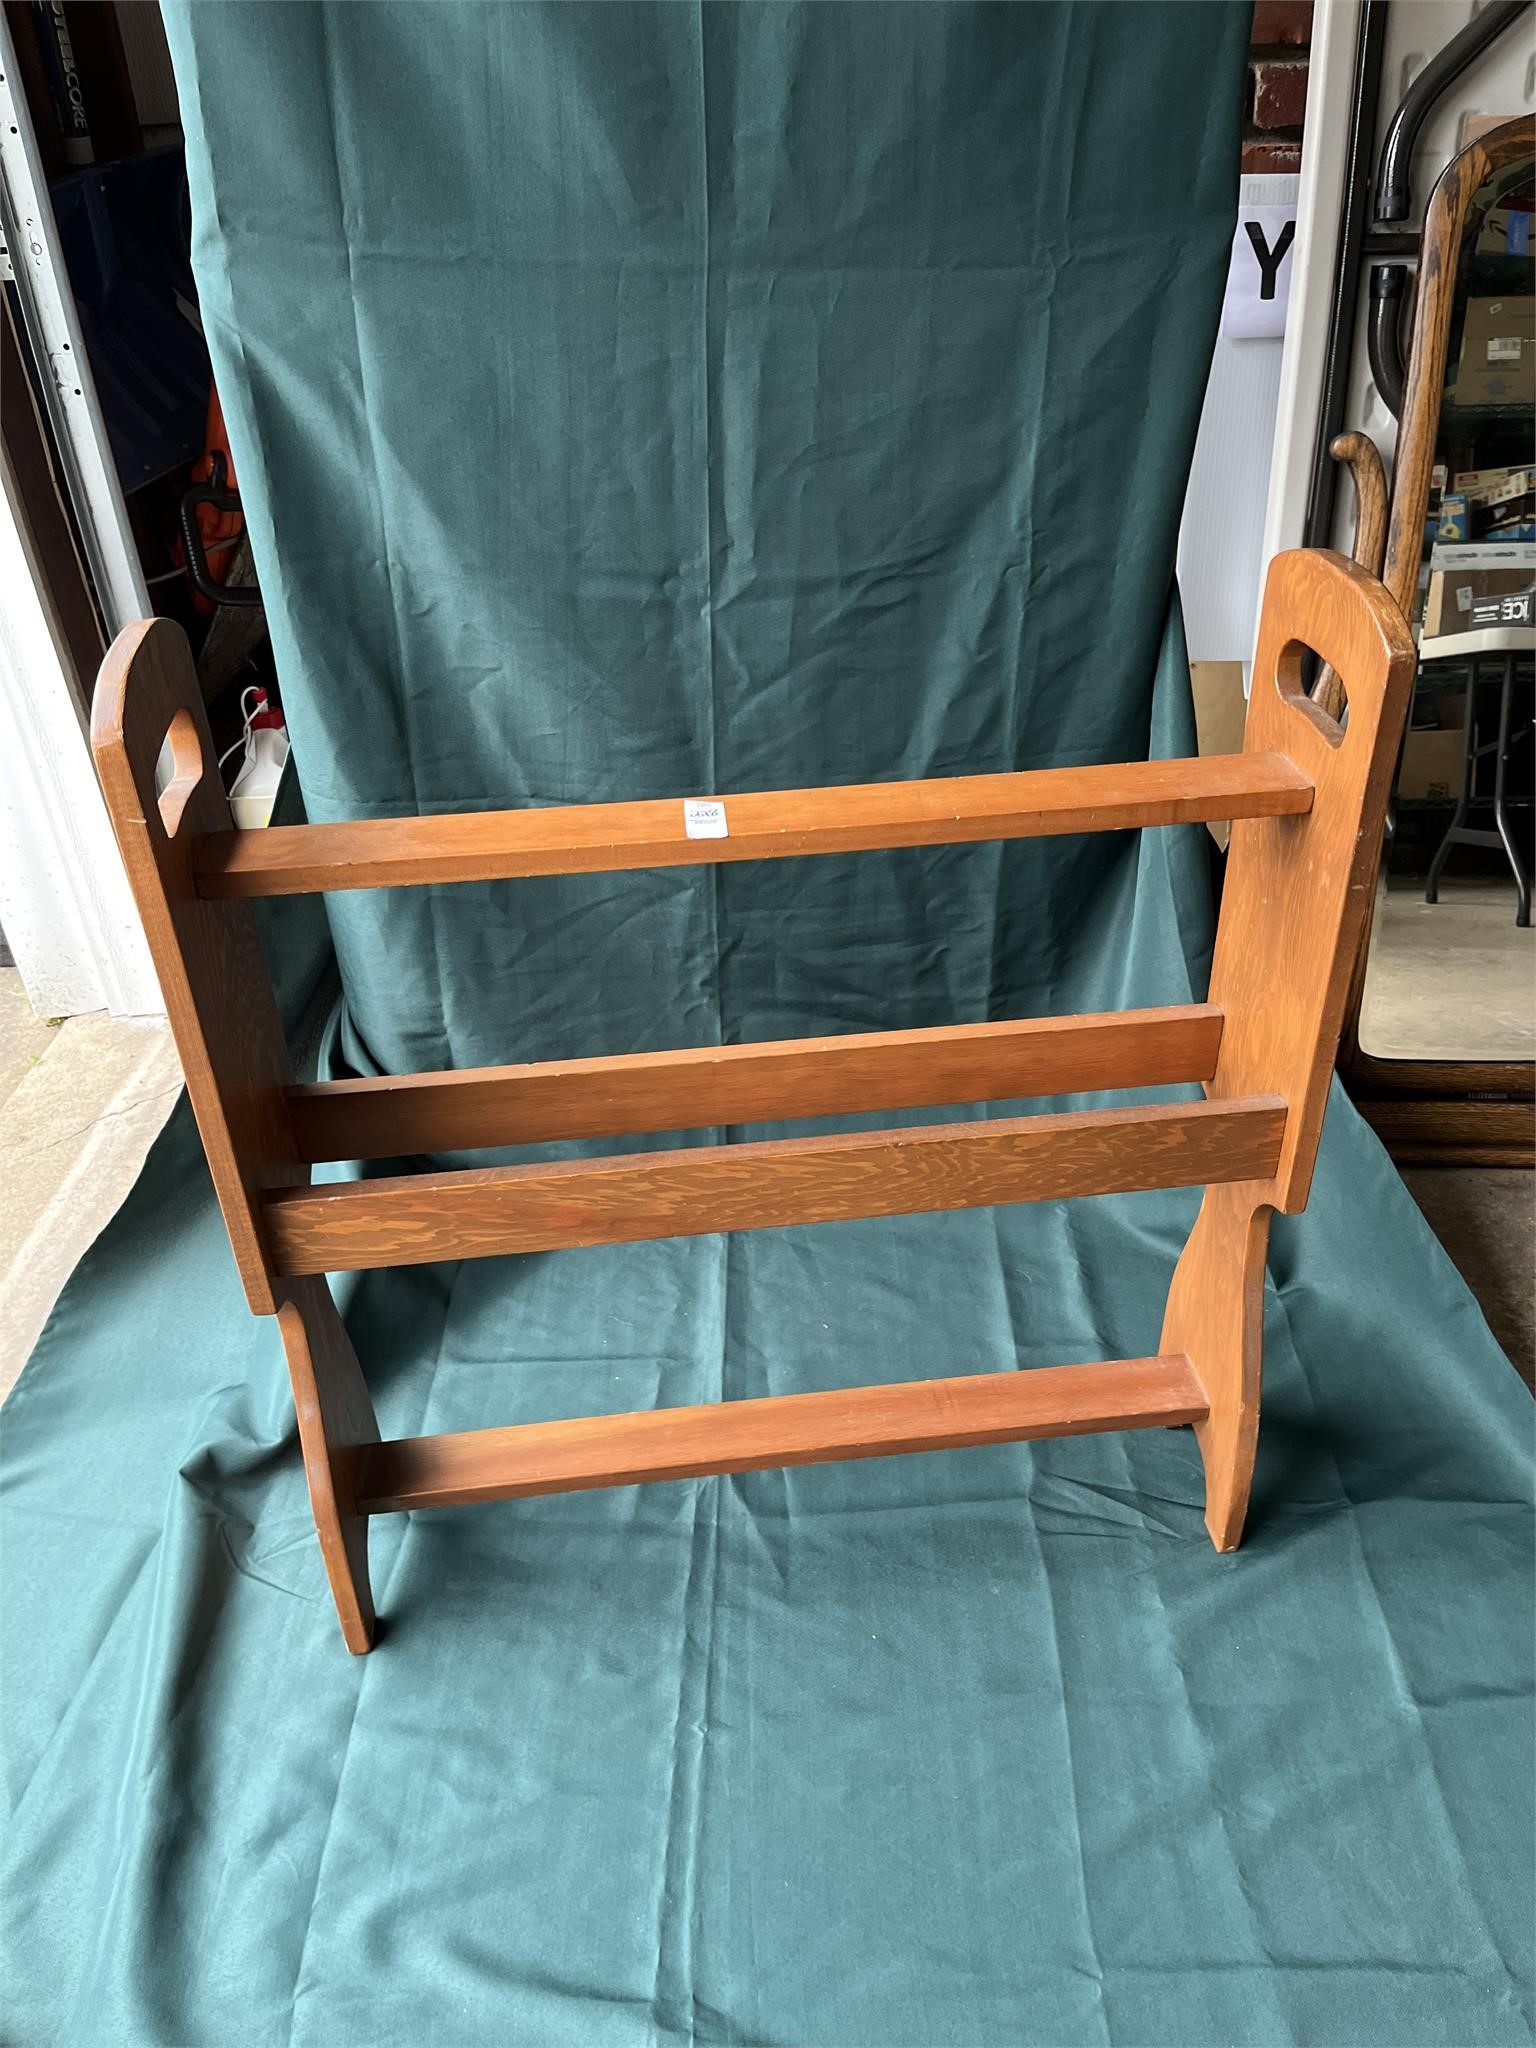 Quilt Rack - No Shipping